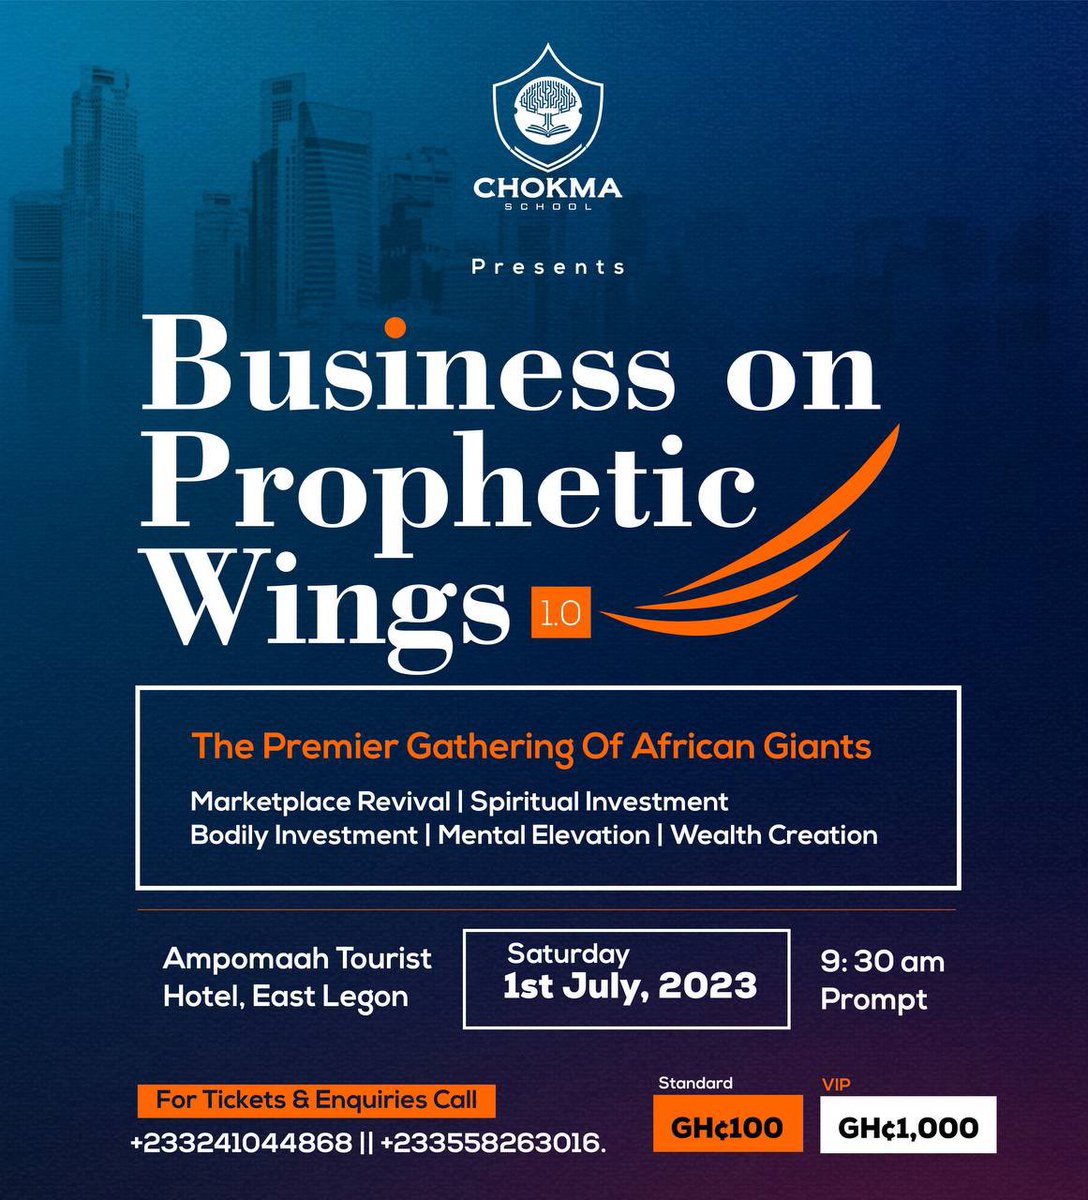 Embrace the chance to exchange ideas, share experiences, and ignite a spark that propels your enterprise towards limitless horizons at the maiden edition of Business On Prophetic Wings! 

#BusinessOnPropheticWings